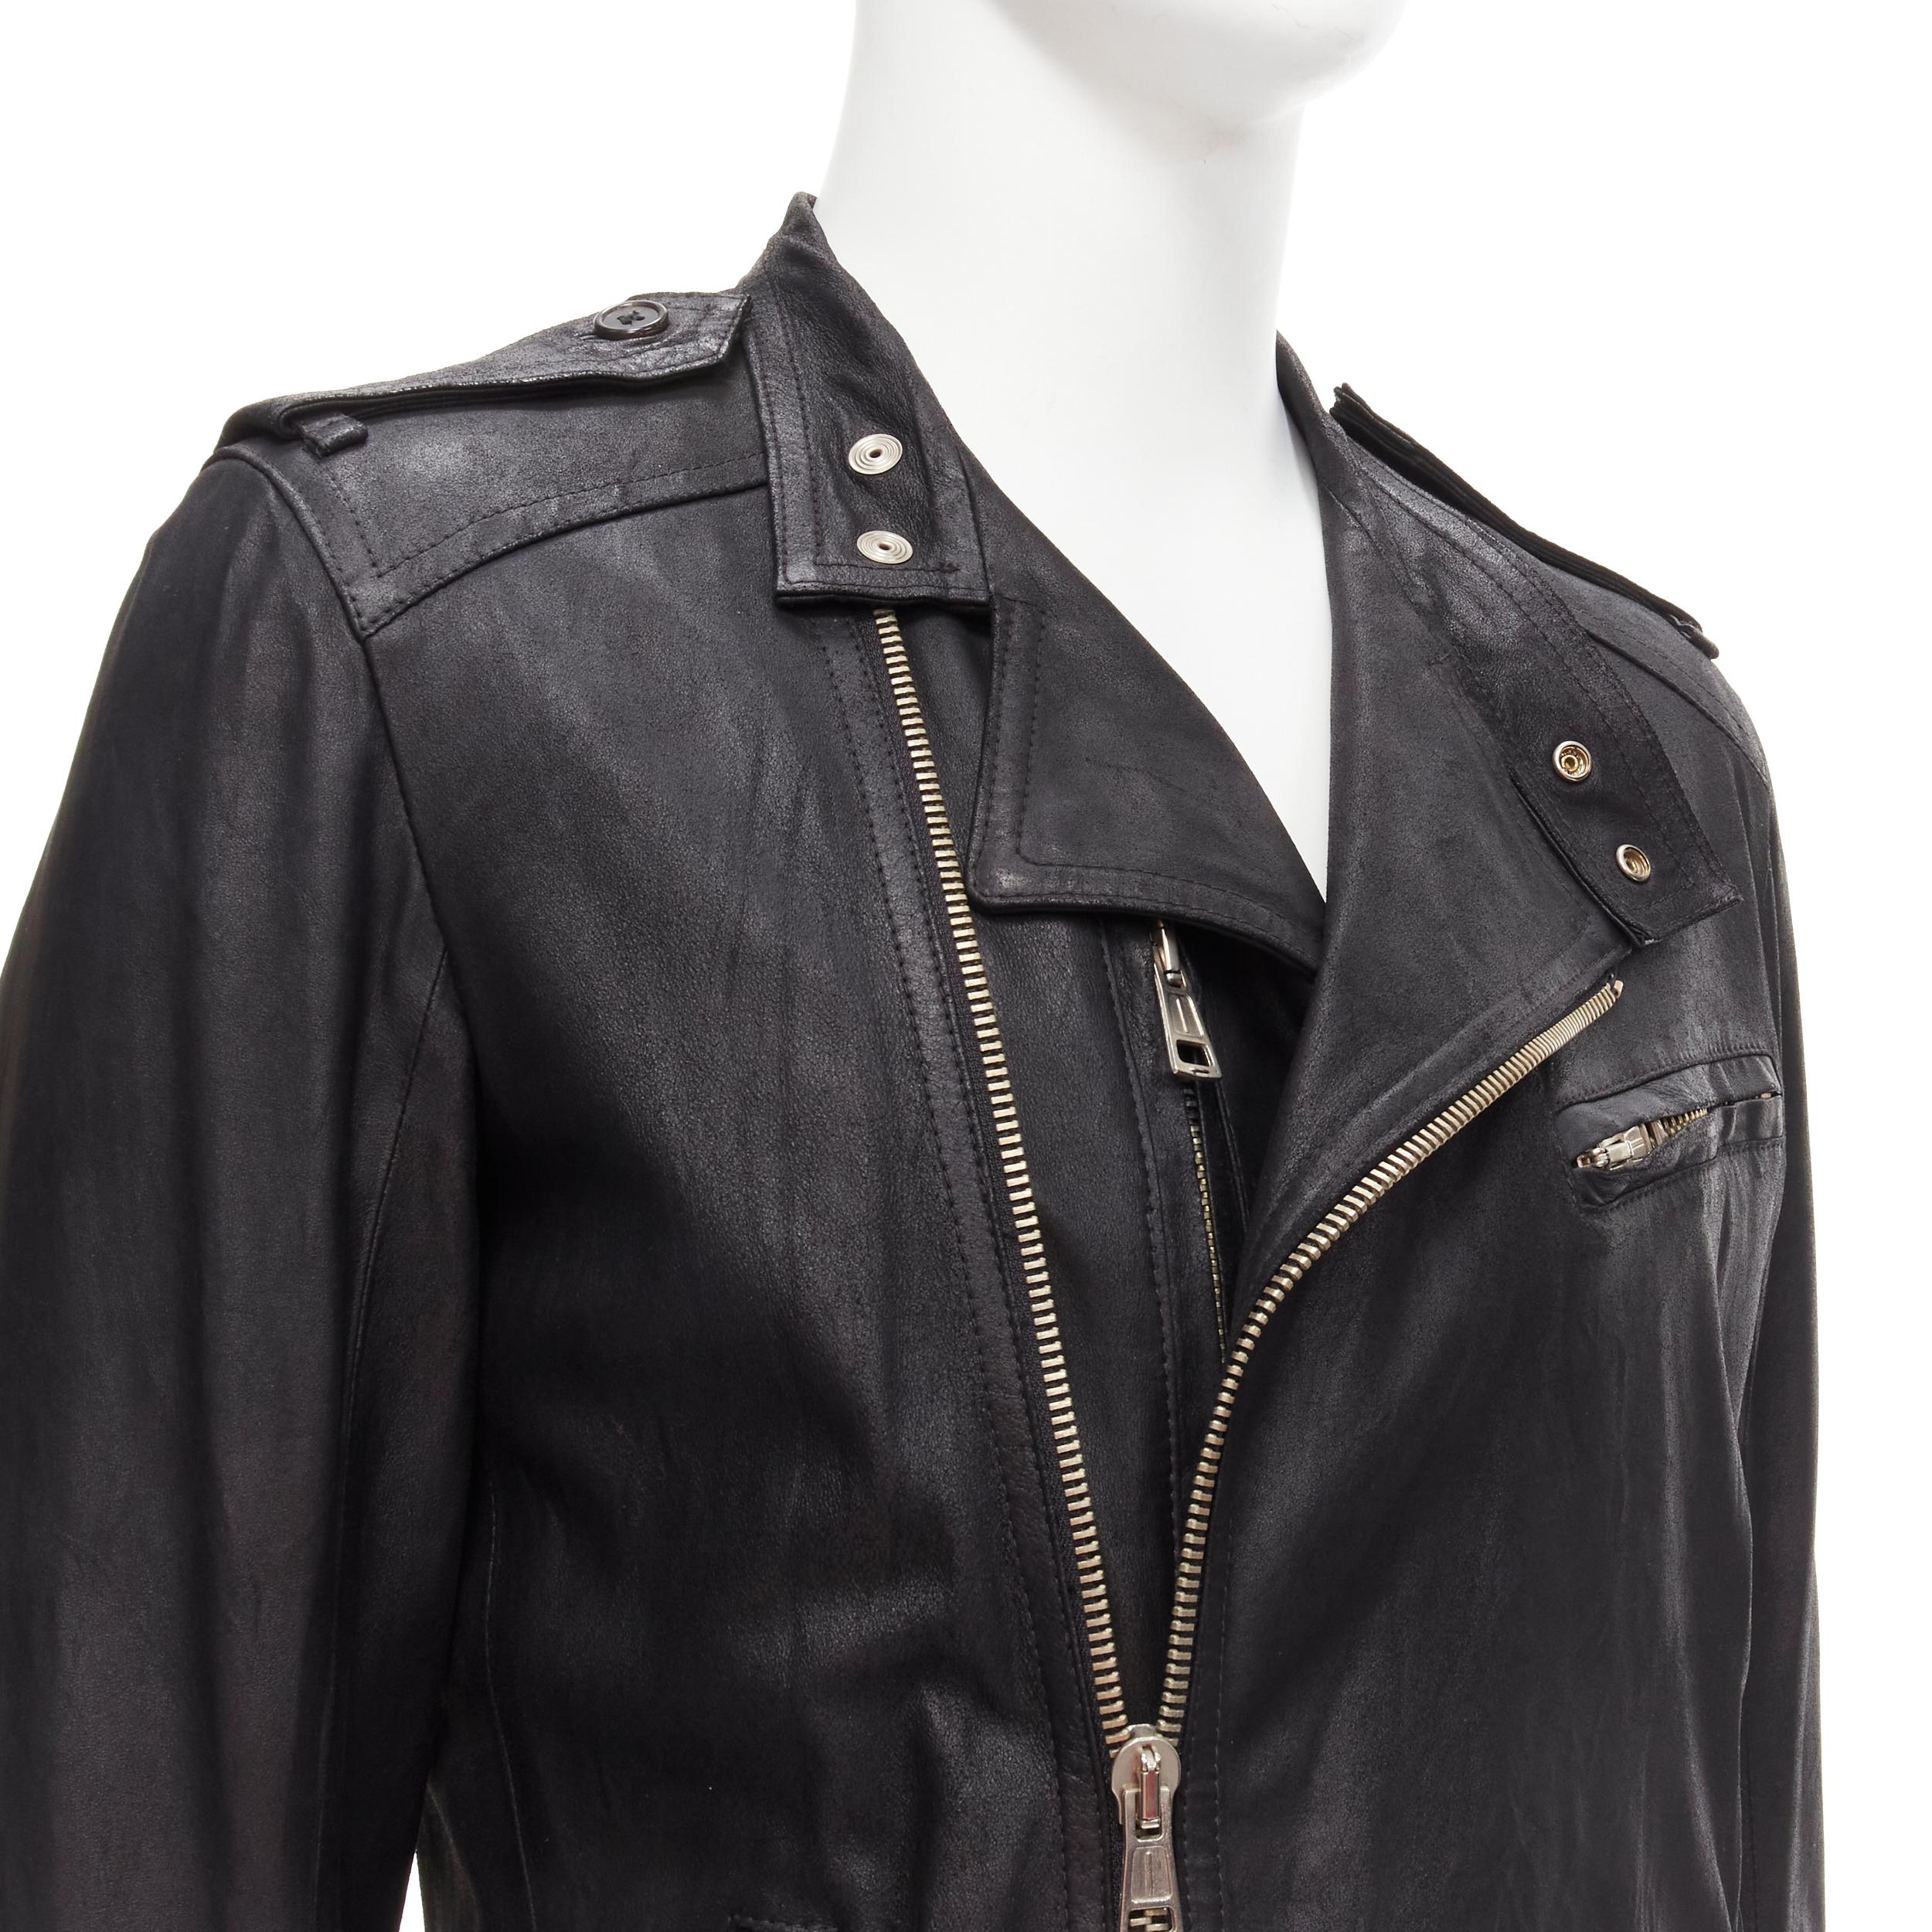 ANN DEMEULEMEESTER Vintage black washed distressed leather classic moto biker jacket XS
Reference: BMPA/A00257
Brand: Ann Demeulemeester
Designer: Ann Demeulemeester
Material: Leather
Color: Black
Pattern: Solid
Closure: Zip
Lining: Black